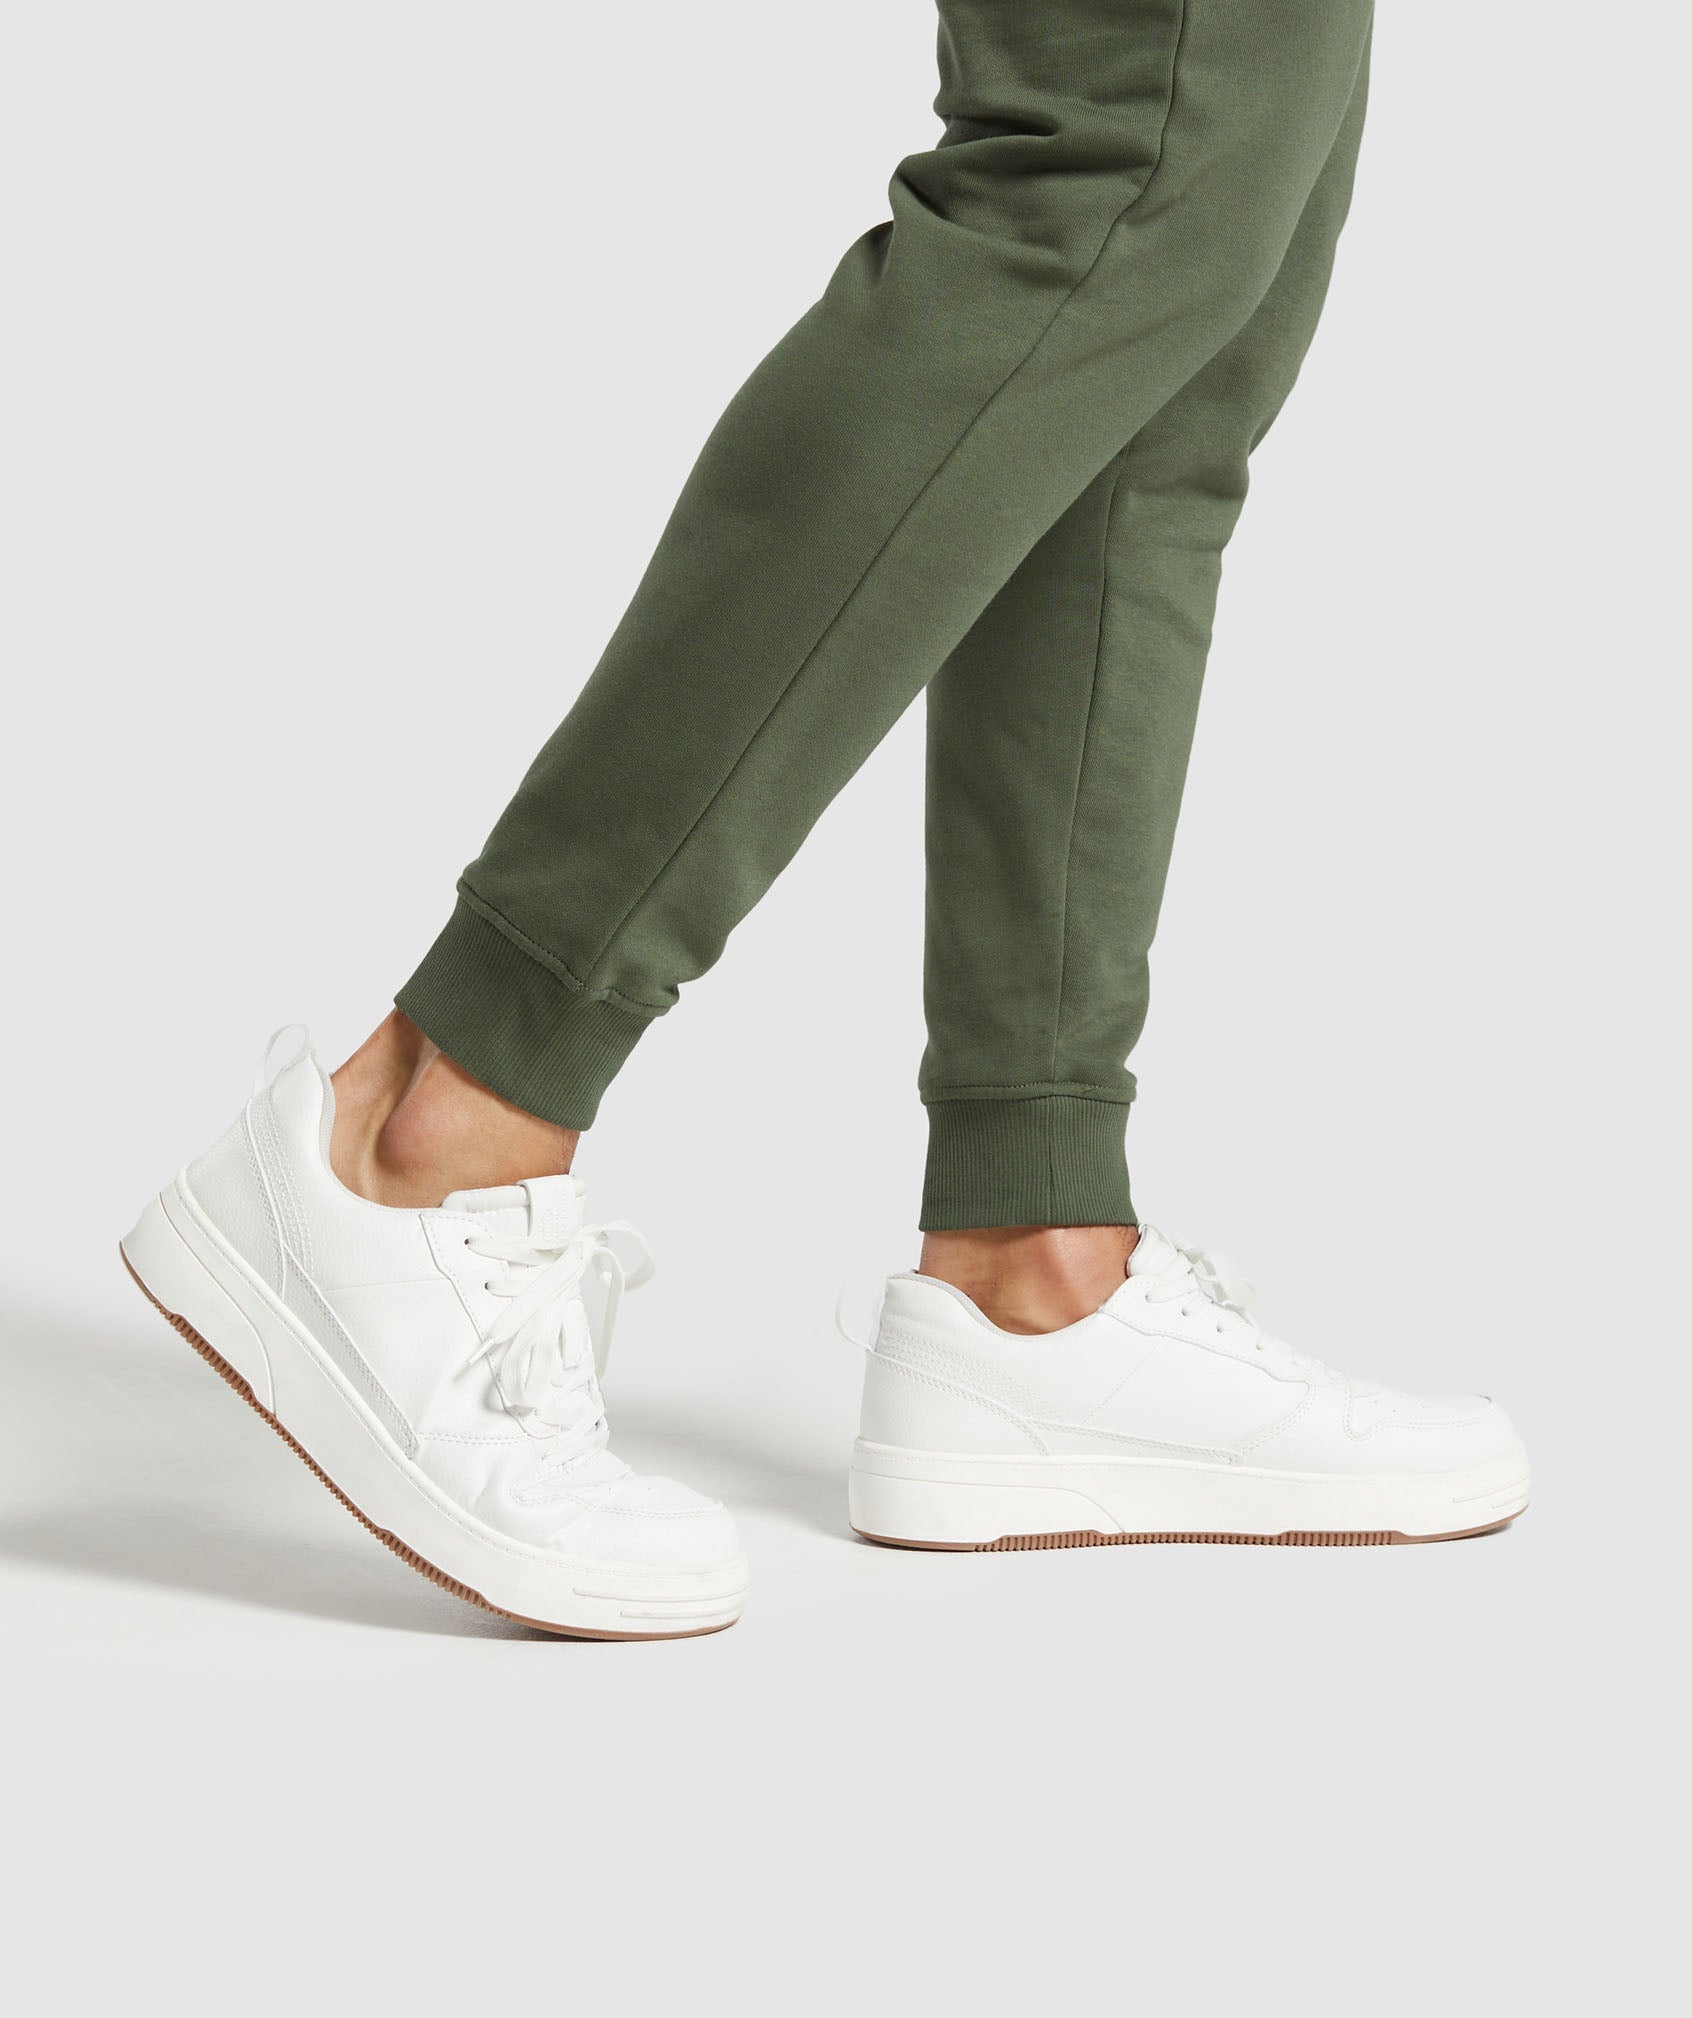 Crest Joggers in Core Olive